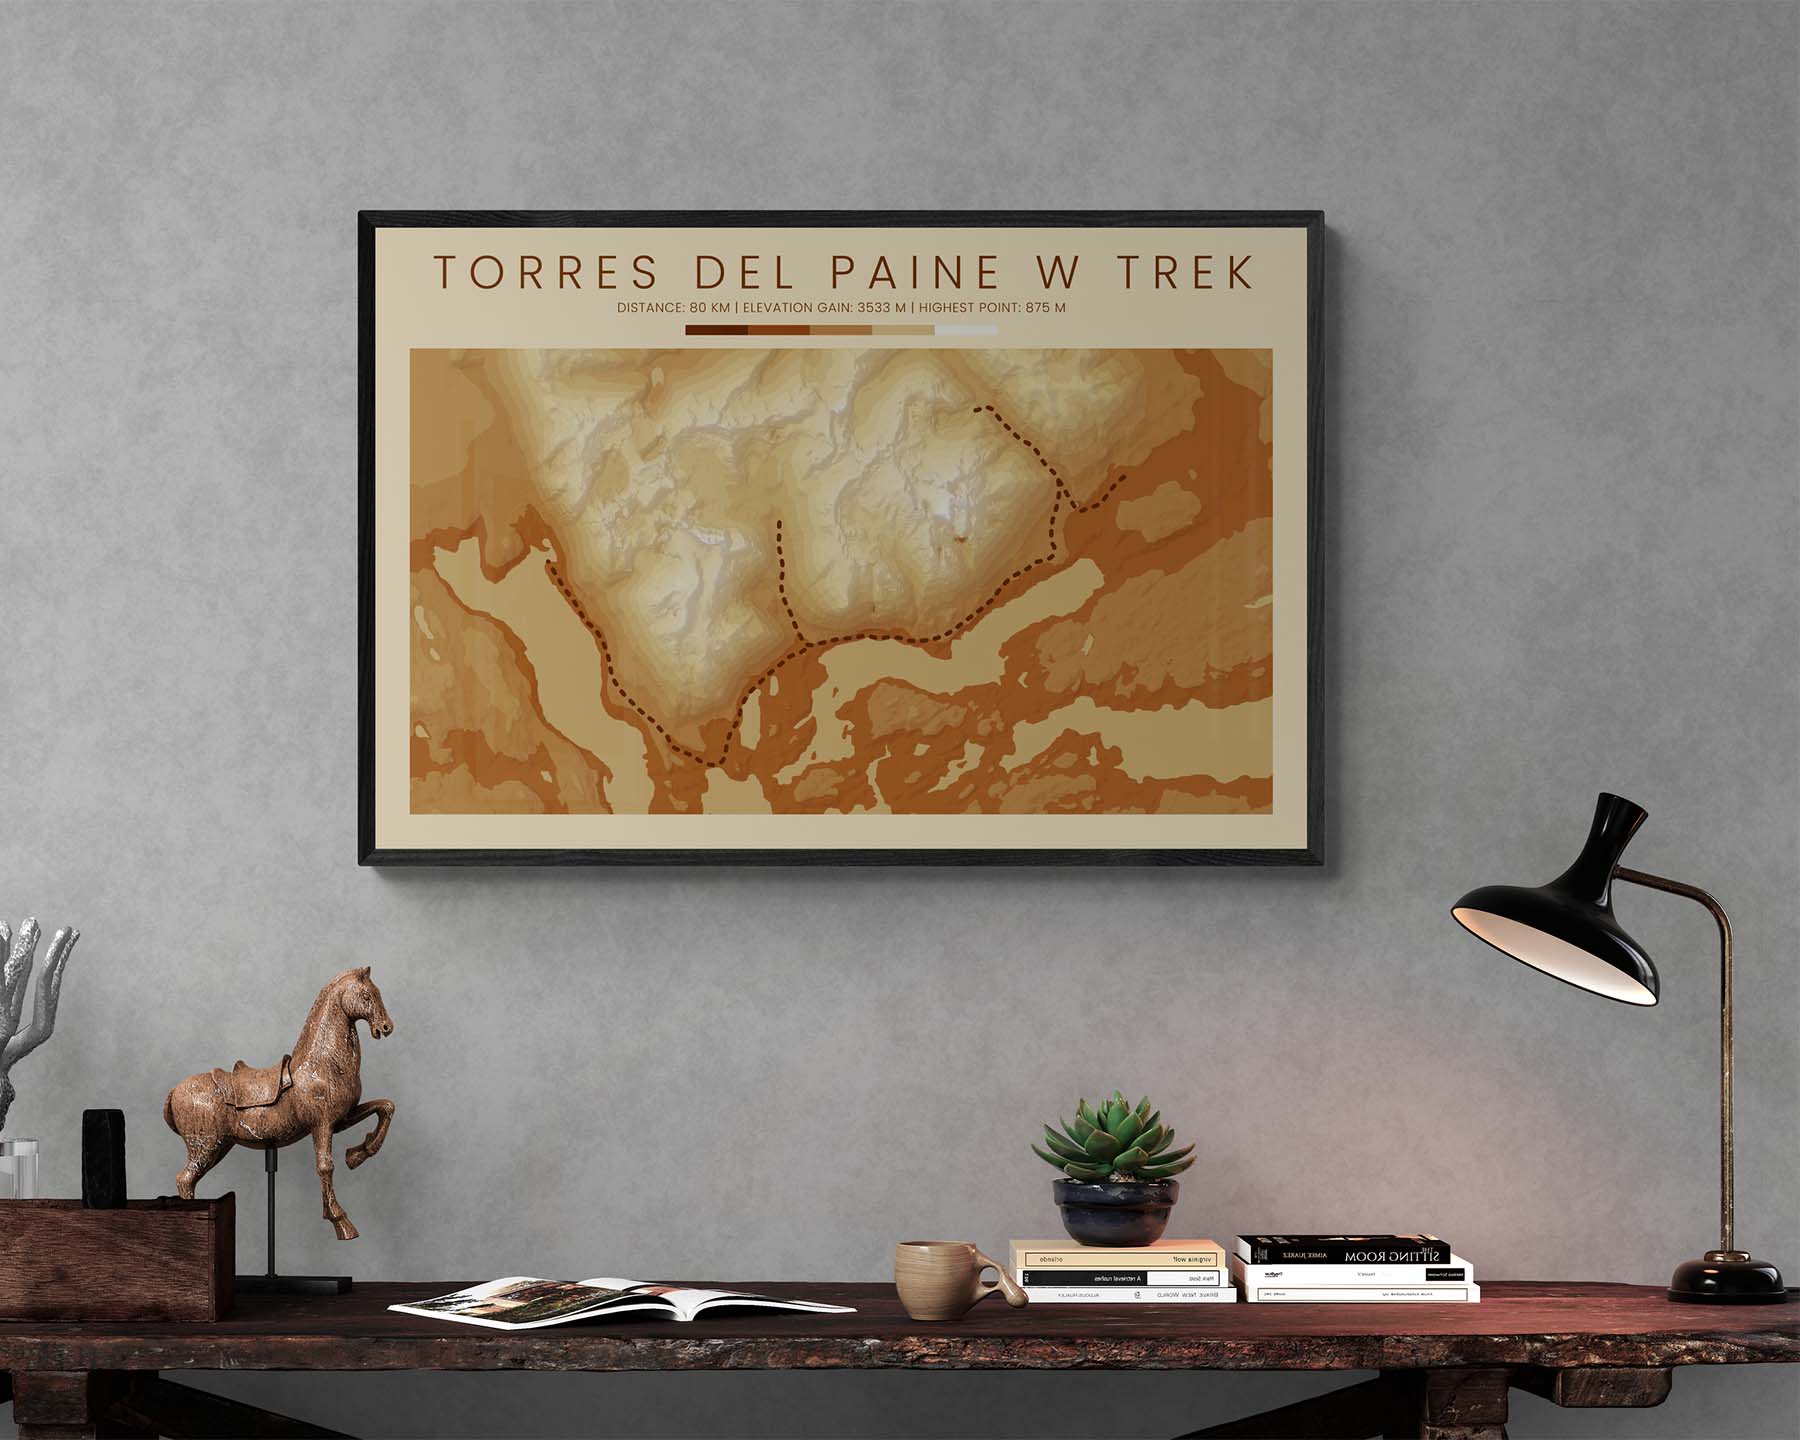 Torres Del Paine W Circuit (South America) Hike Wall Art with Contour Map in Modern Room Decor